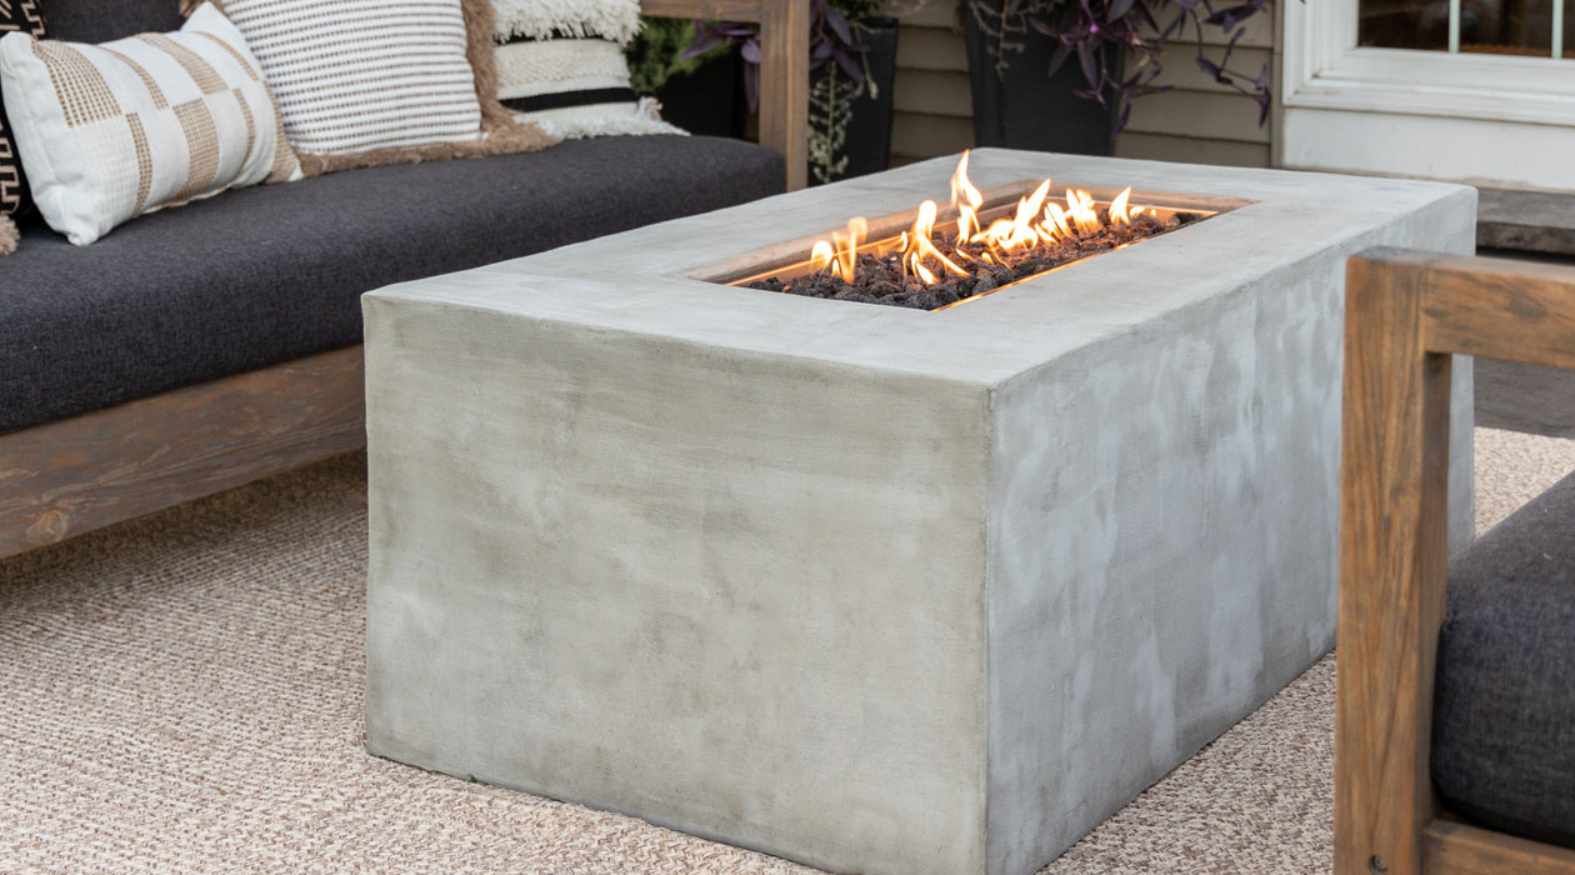 How To Make Your Own Fire Pit Table